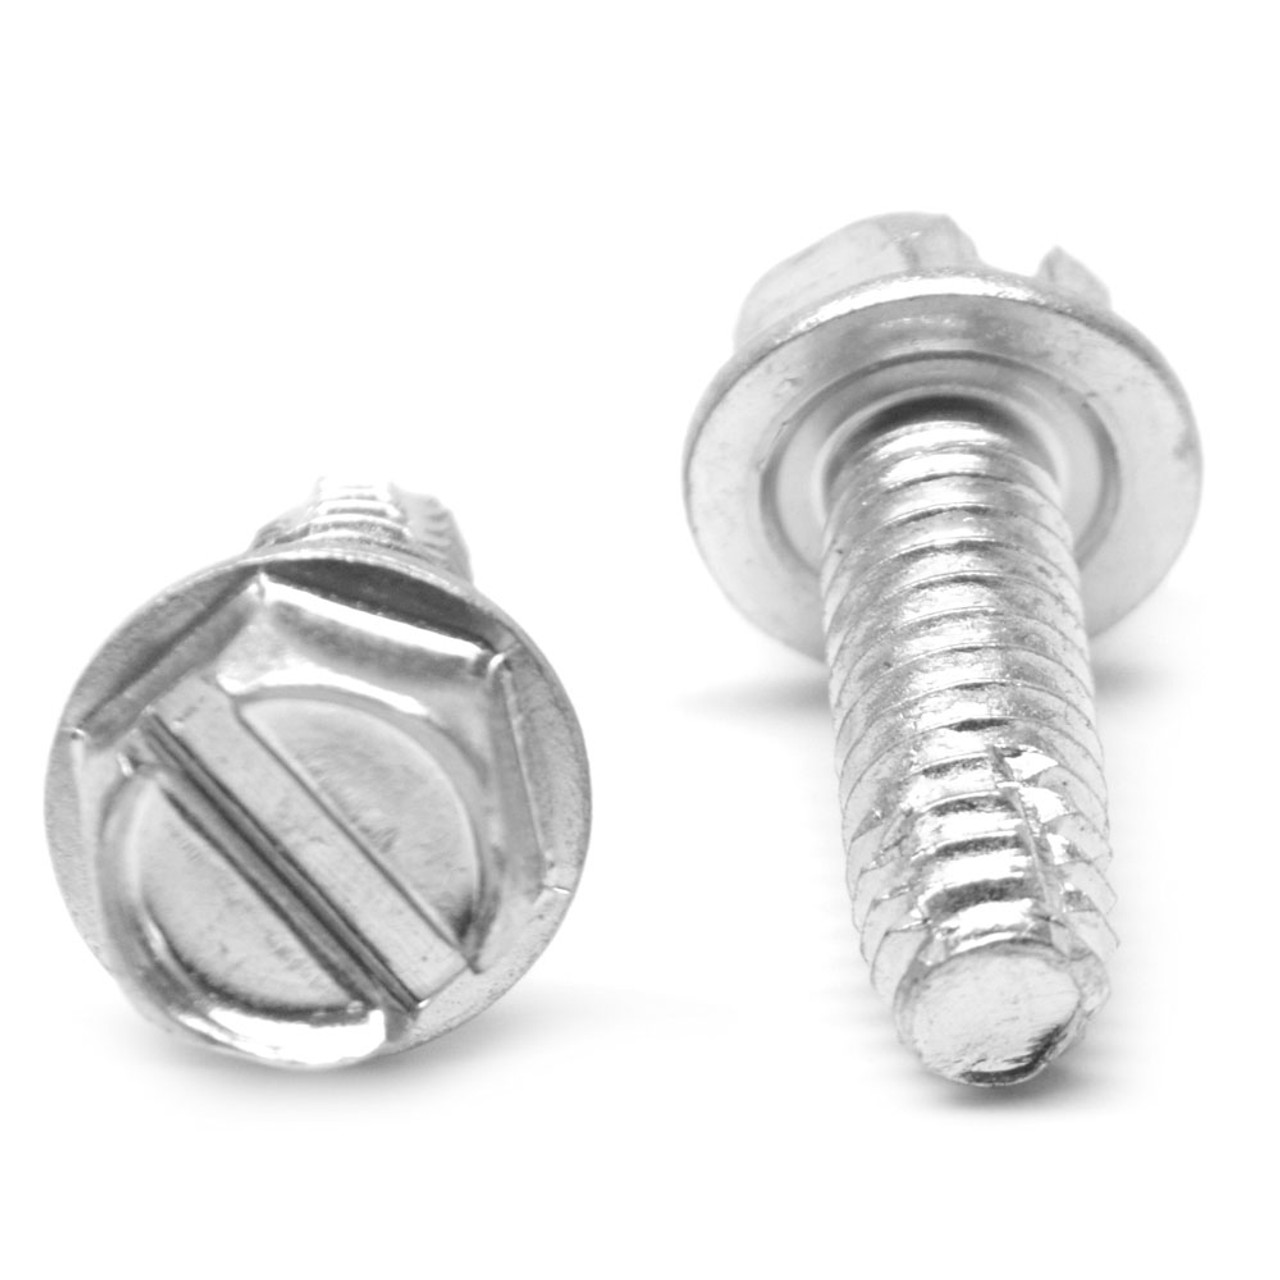 1/4-20 x 5/8 Coarse Thread Thread Cutting Screw Slotted Hex Washer Head Type F Stainless Steel 18-8